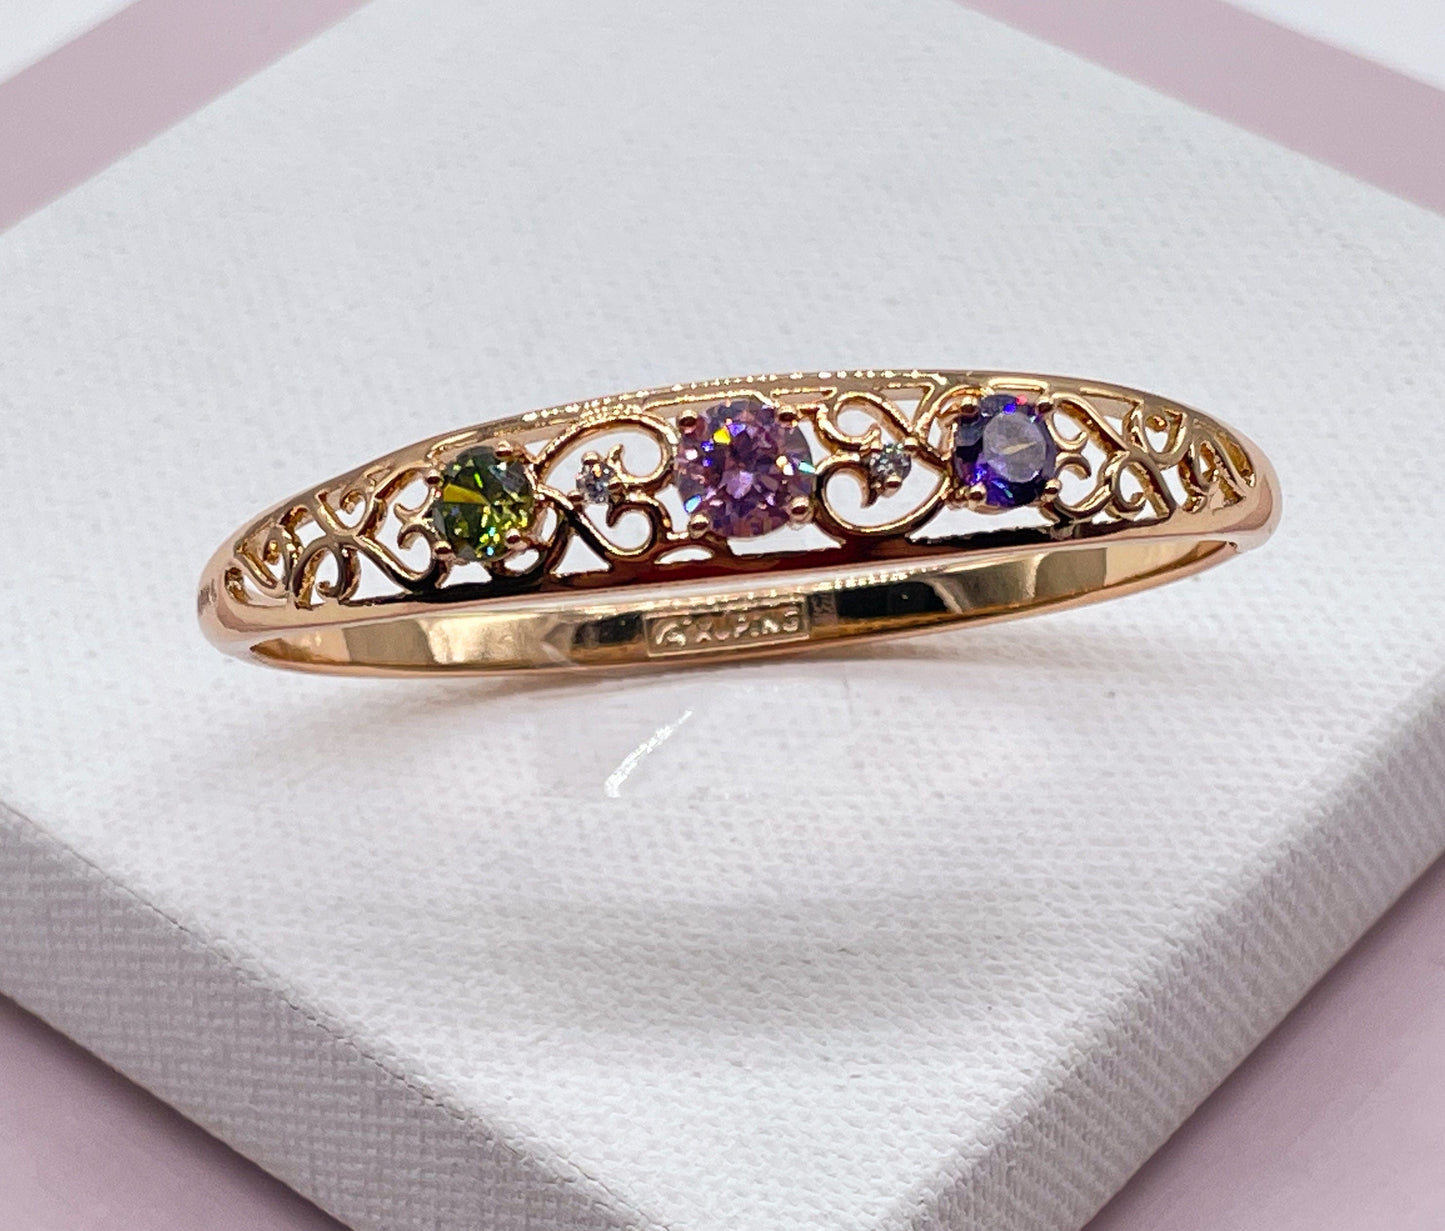 18k Gold Layered Bangle In Rose Gold Featuring Colorful Crystals